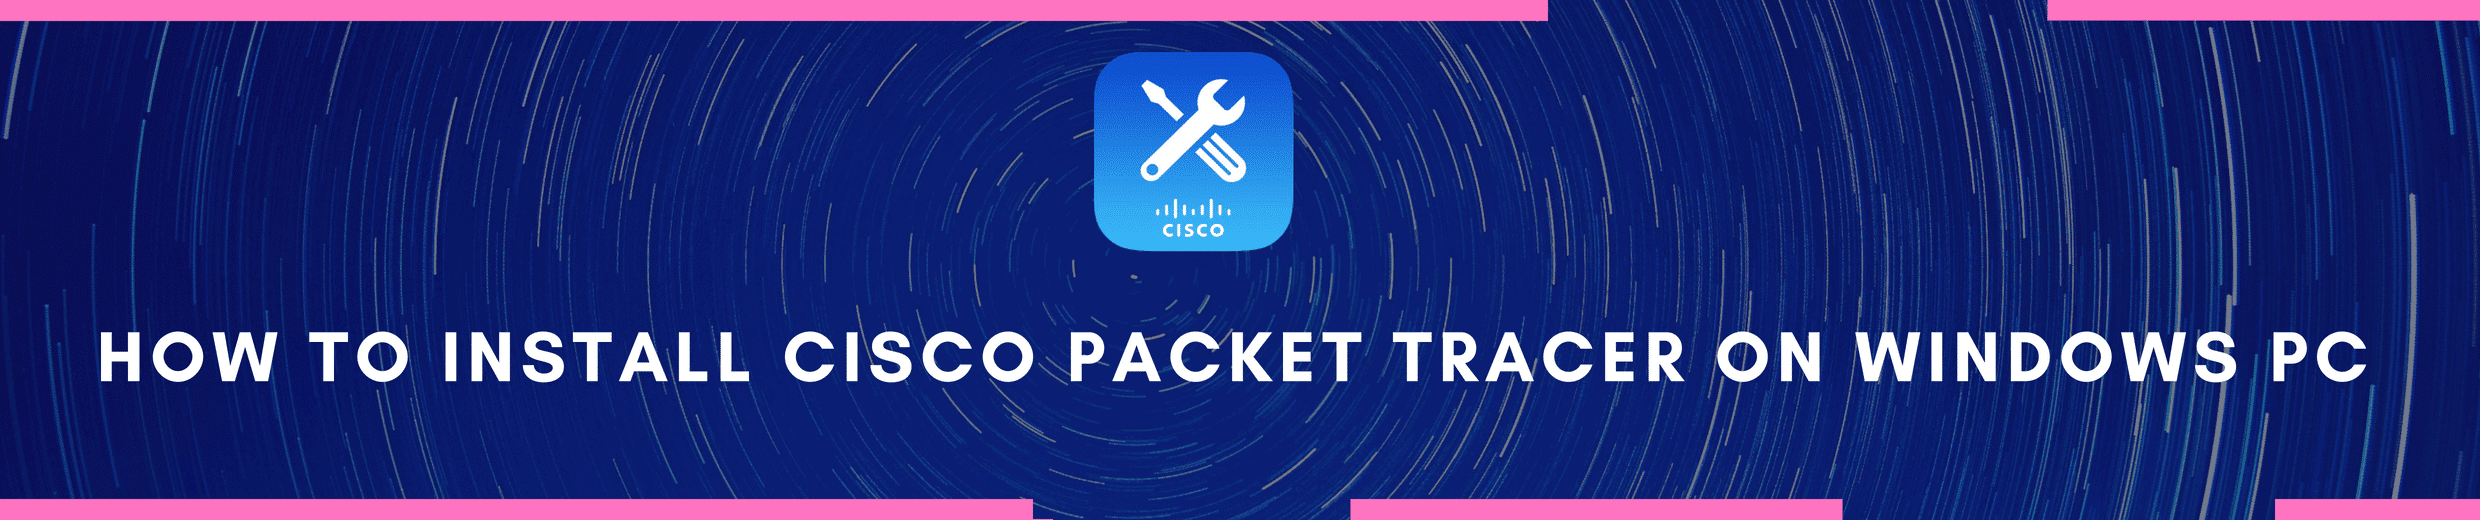 How to Install Cisco Packet Tracer On Windows PC